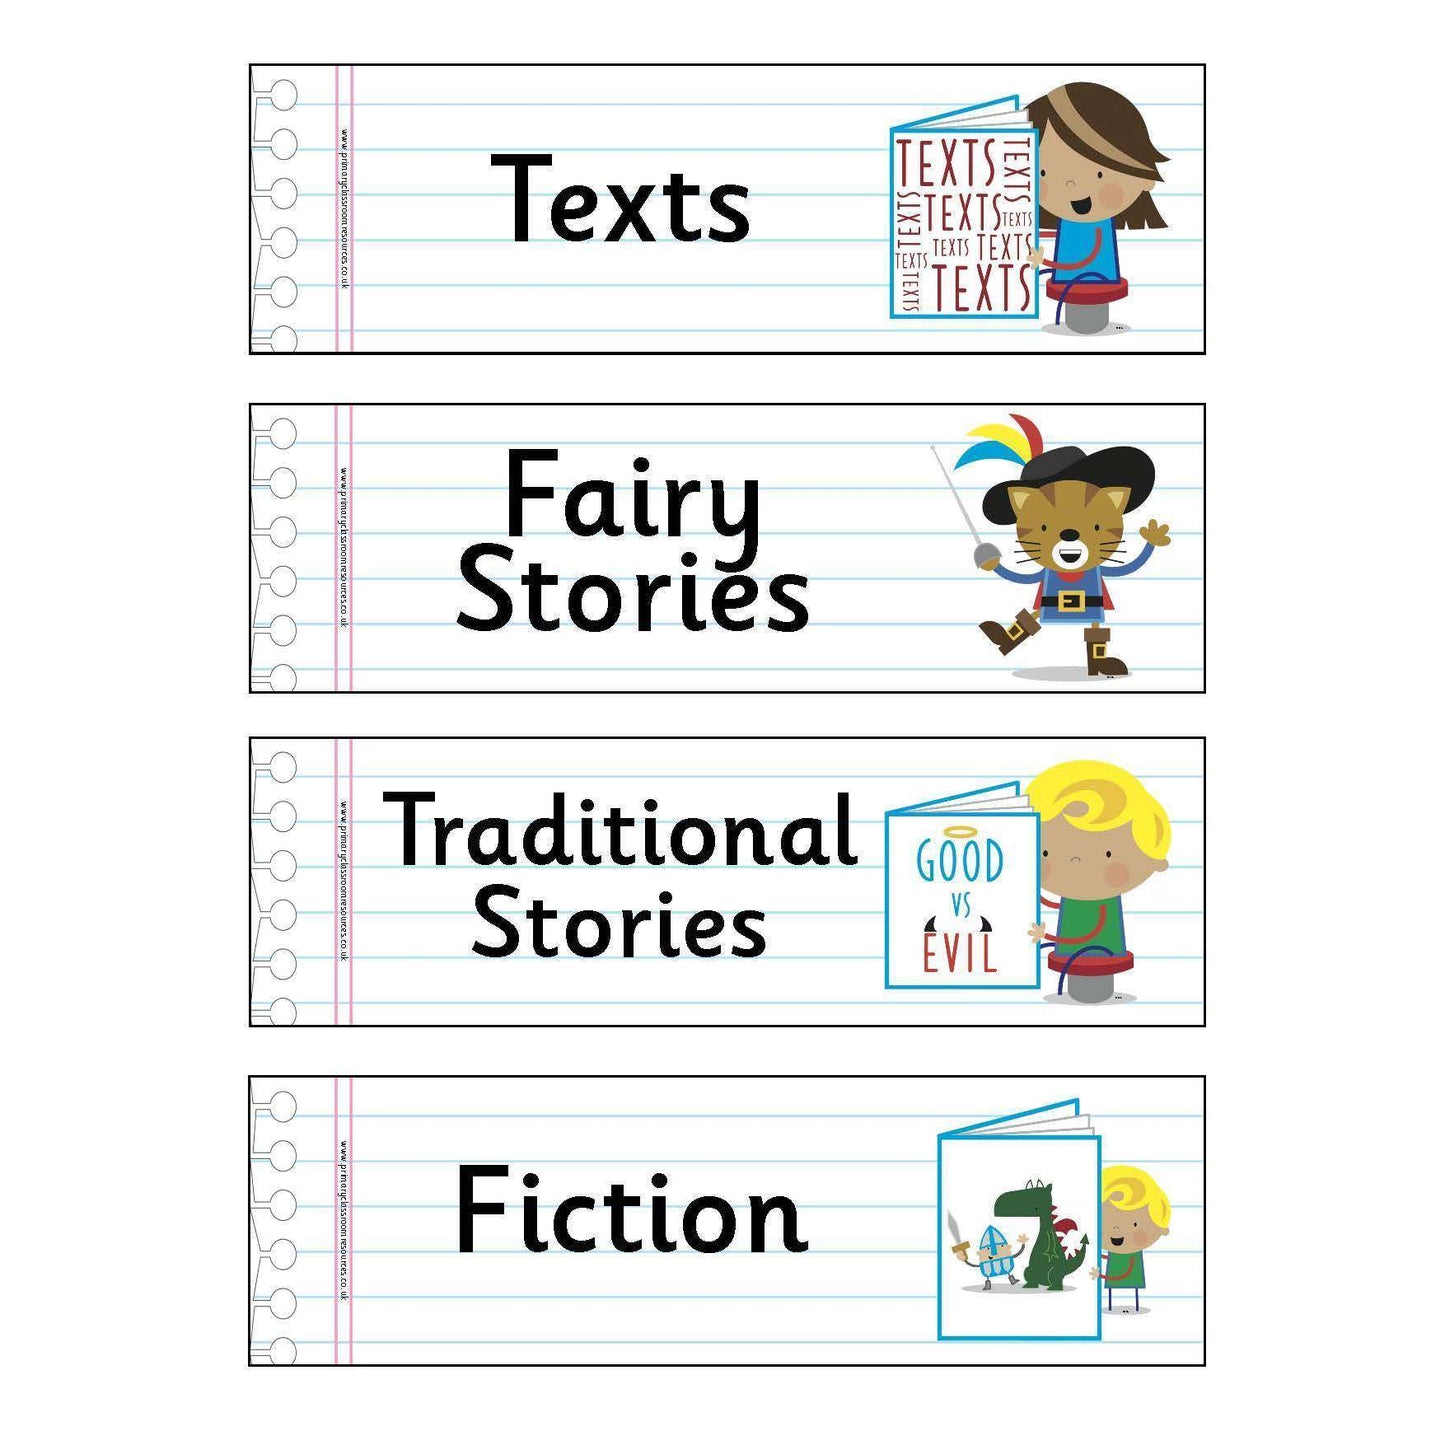 Literary Genres Flashcards:Primary Classroom Resources